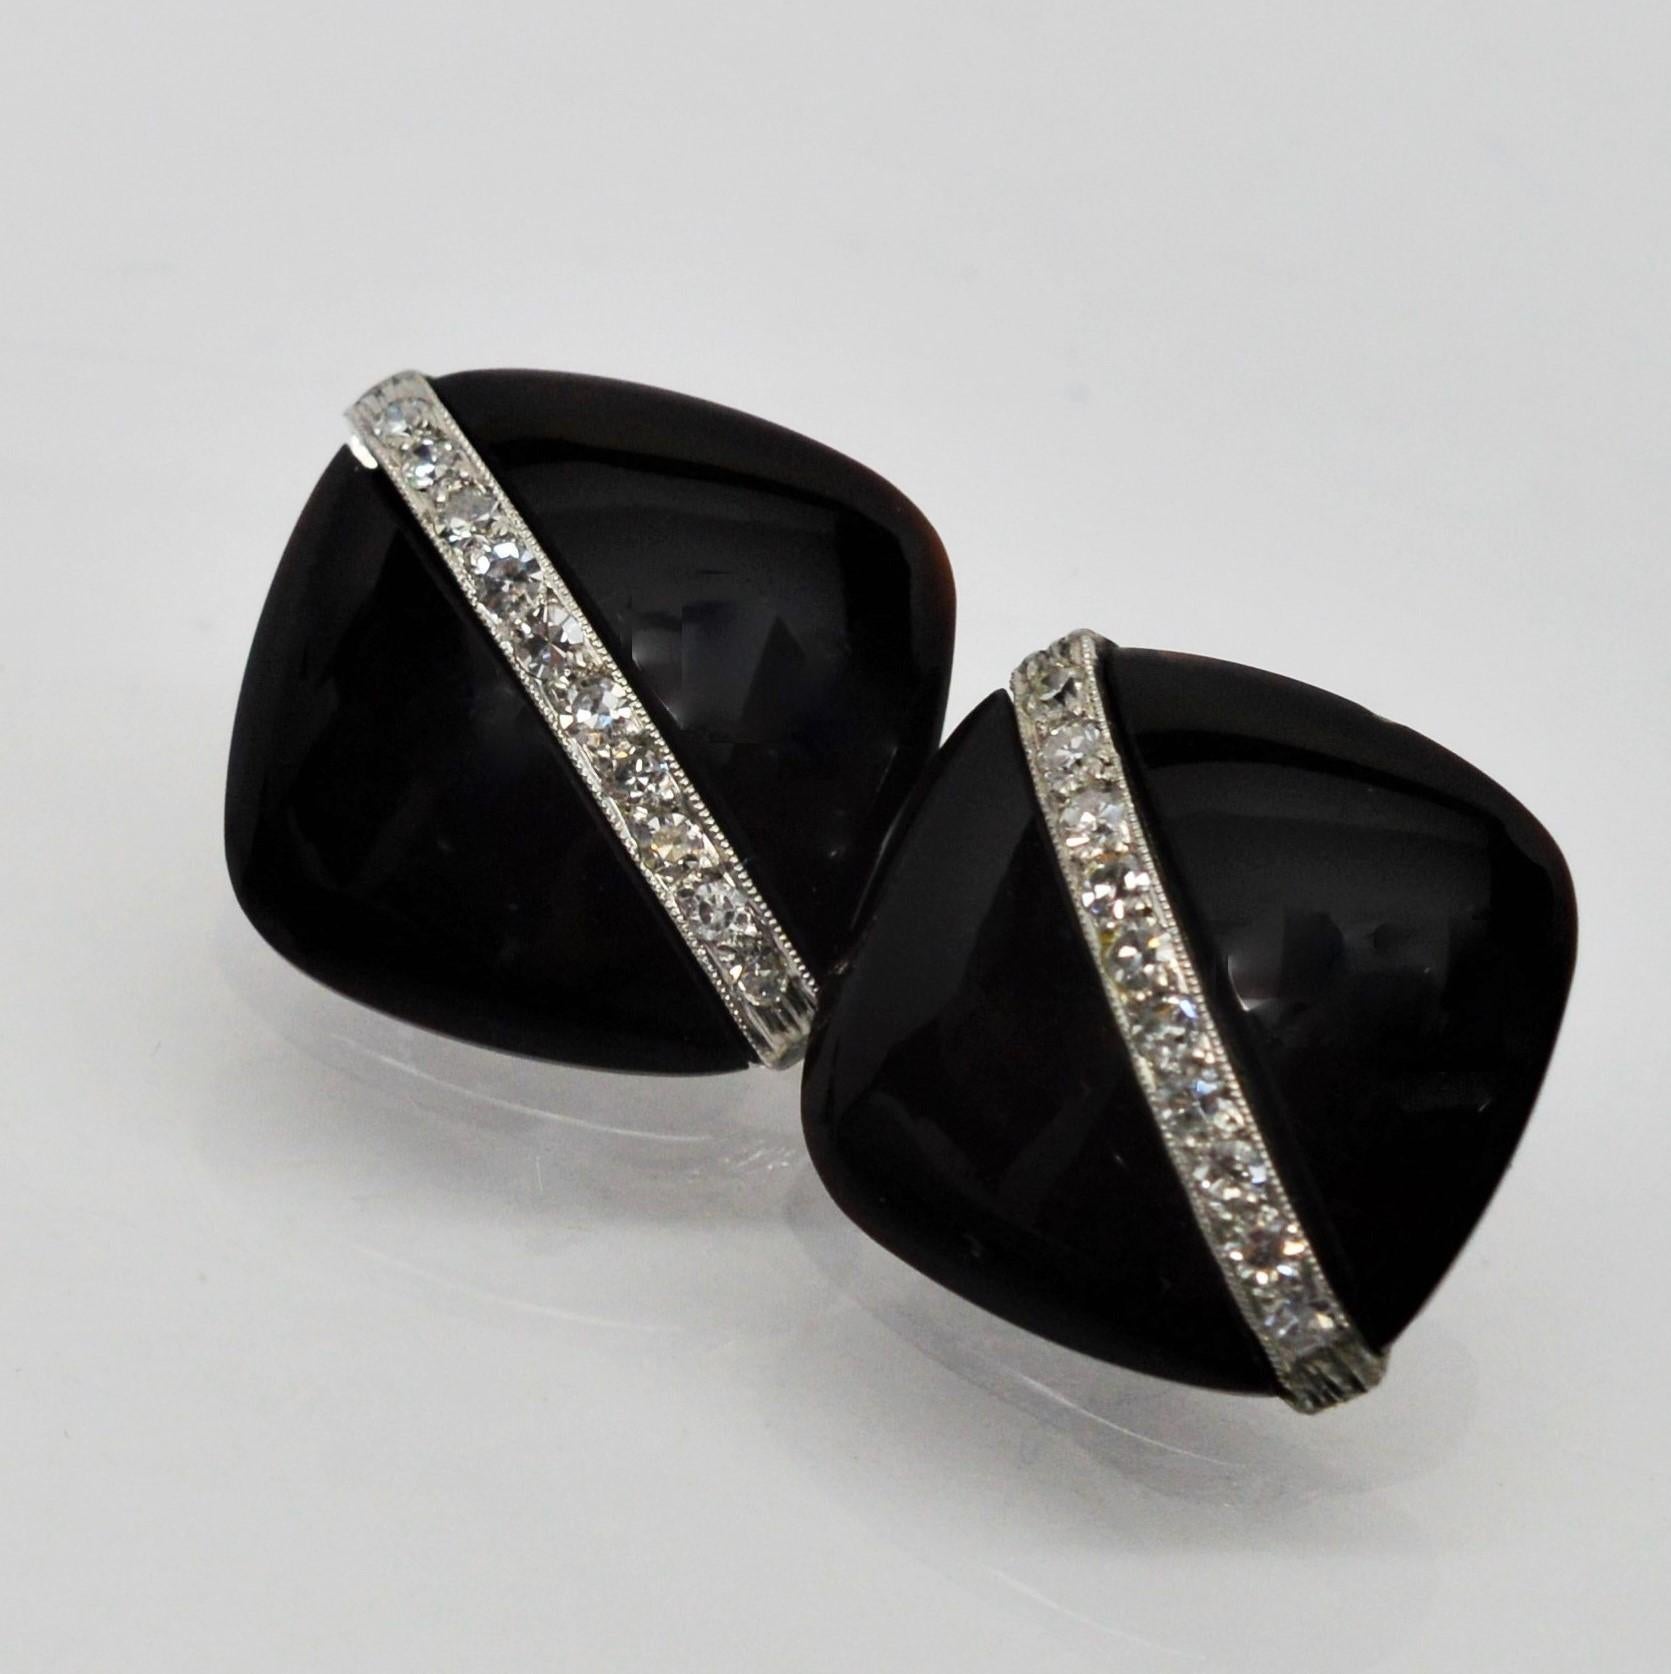 It's all in the details. Add that extra touch to an outfit with these striking cuff links of black onyx adorned with a ribbon of white gold inlaid with  .40 carats total weight of diamond accents. A classic chain link pair measuring 1/2 x 1/2 inch